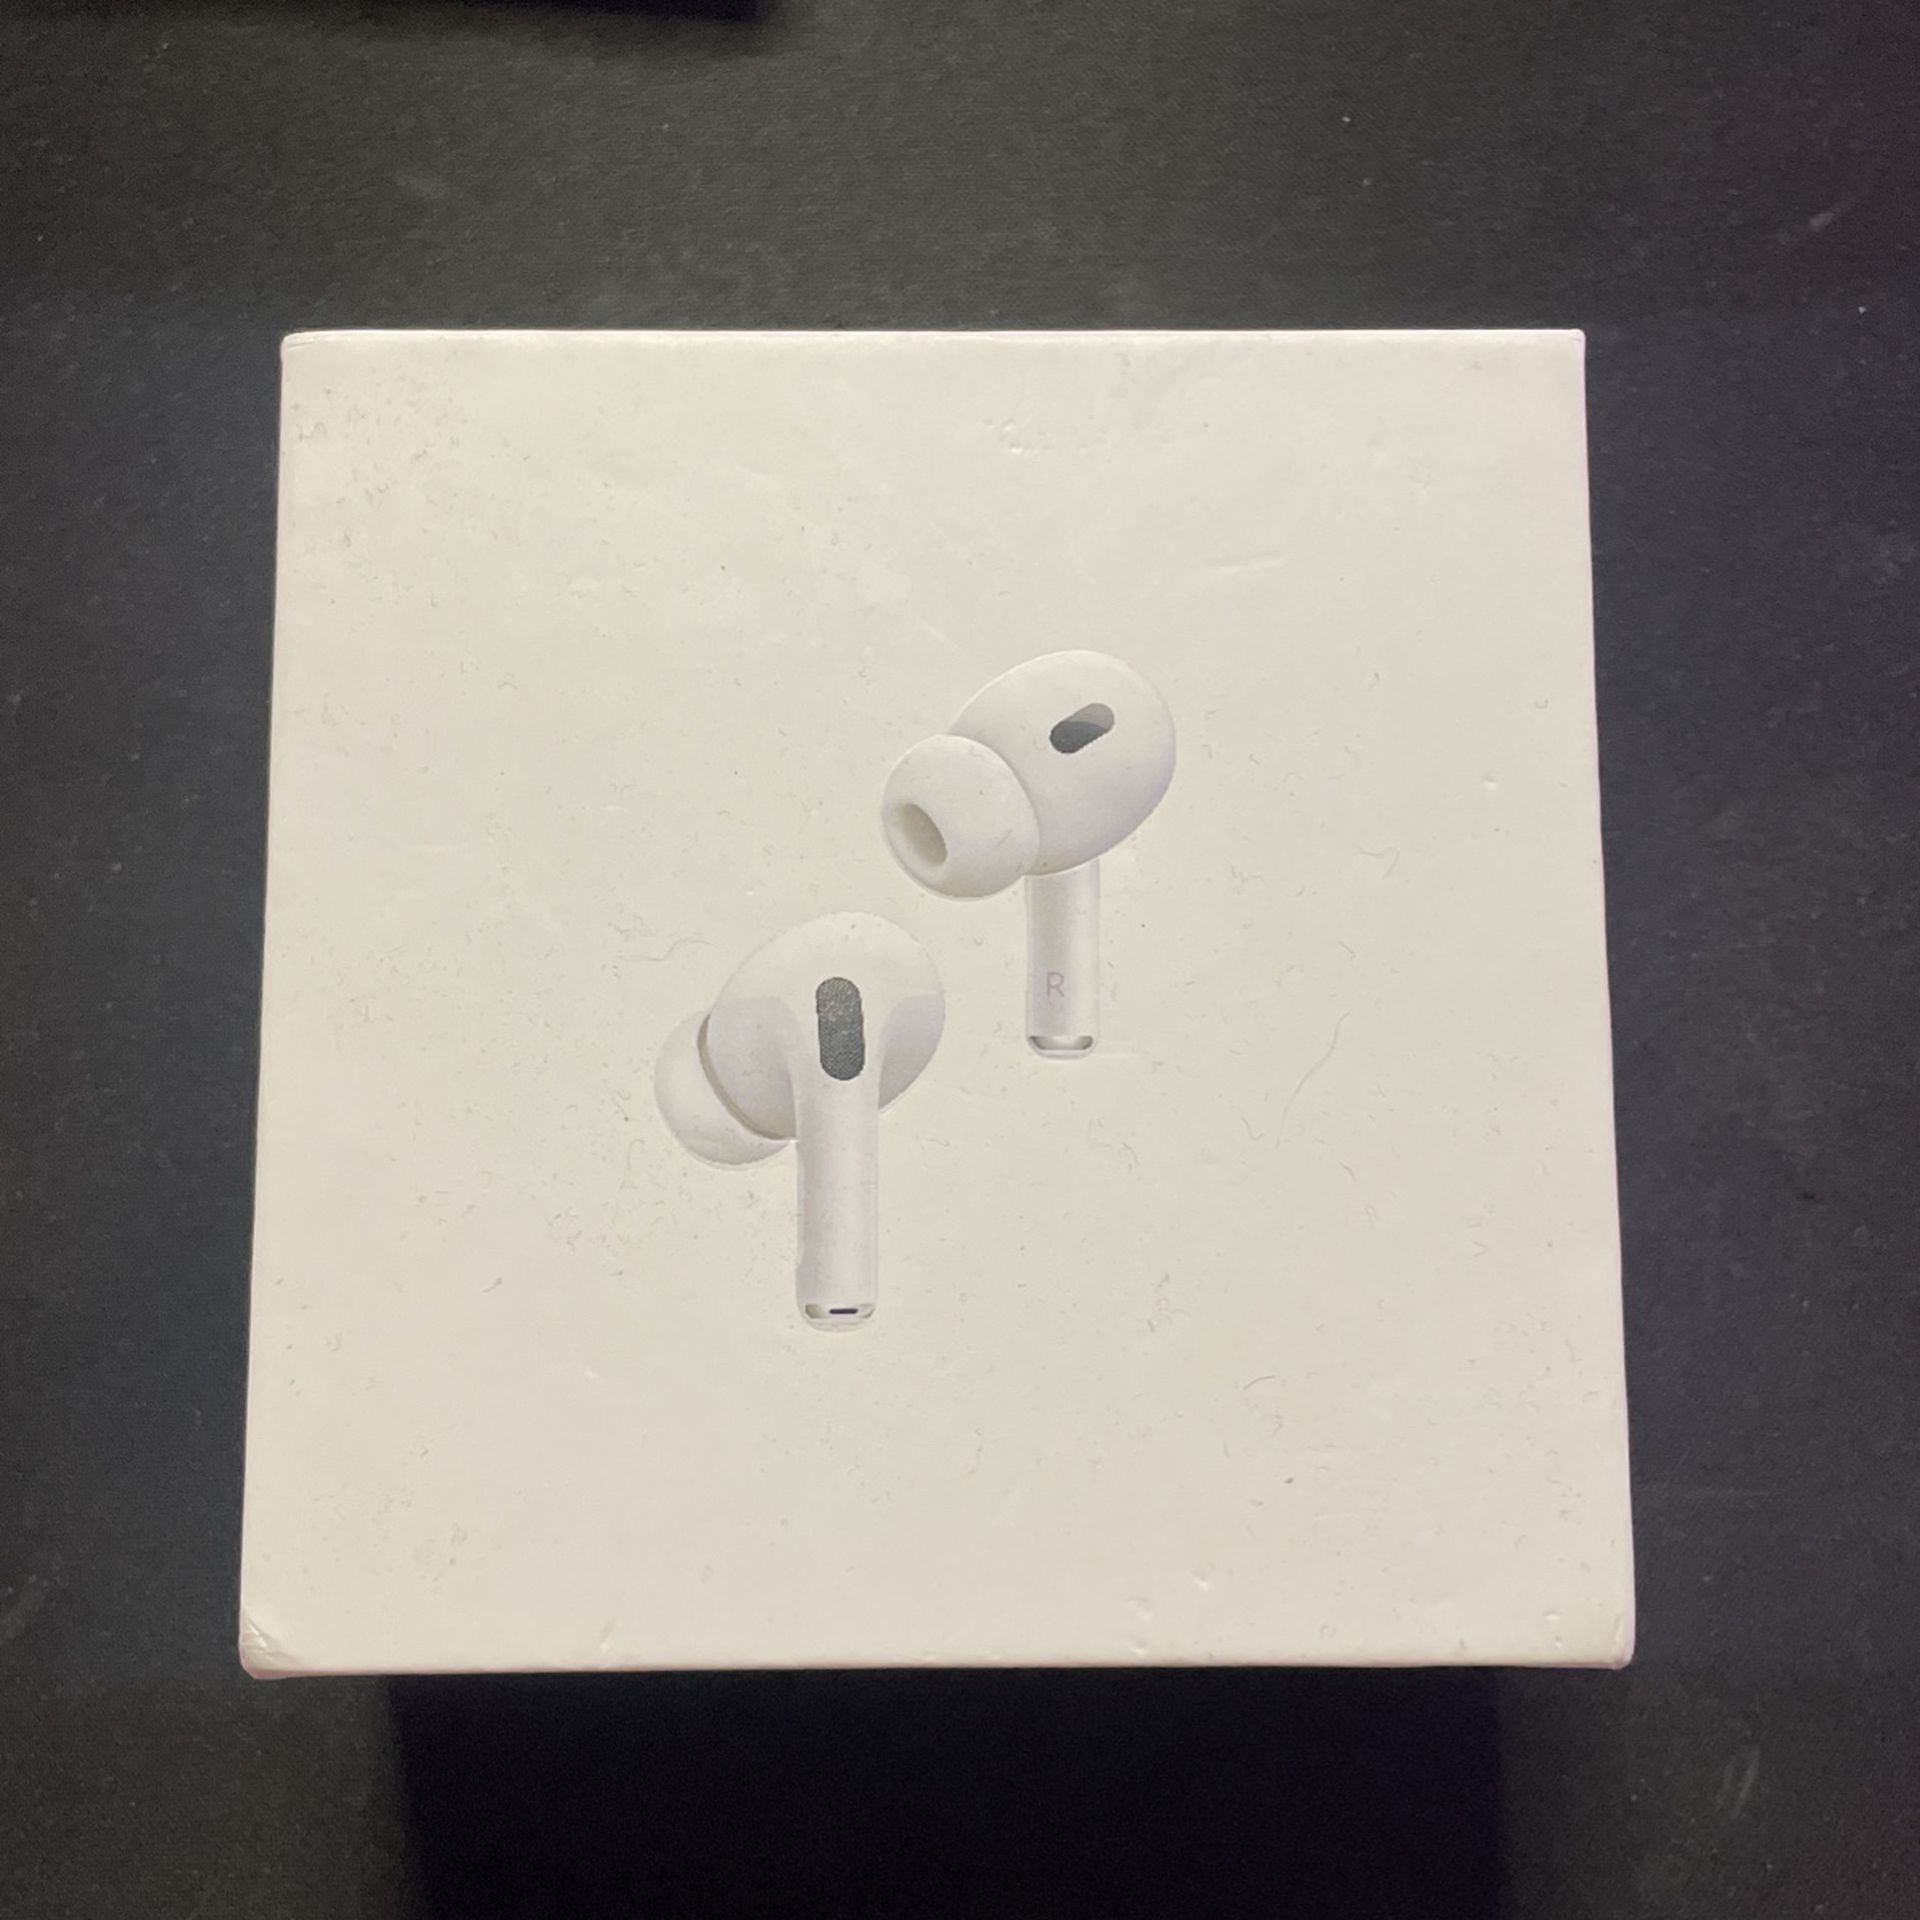 2nd generation airpod pros